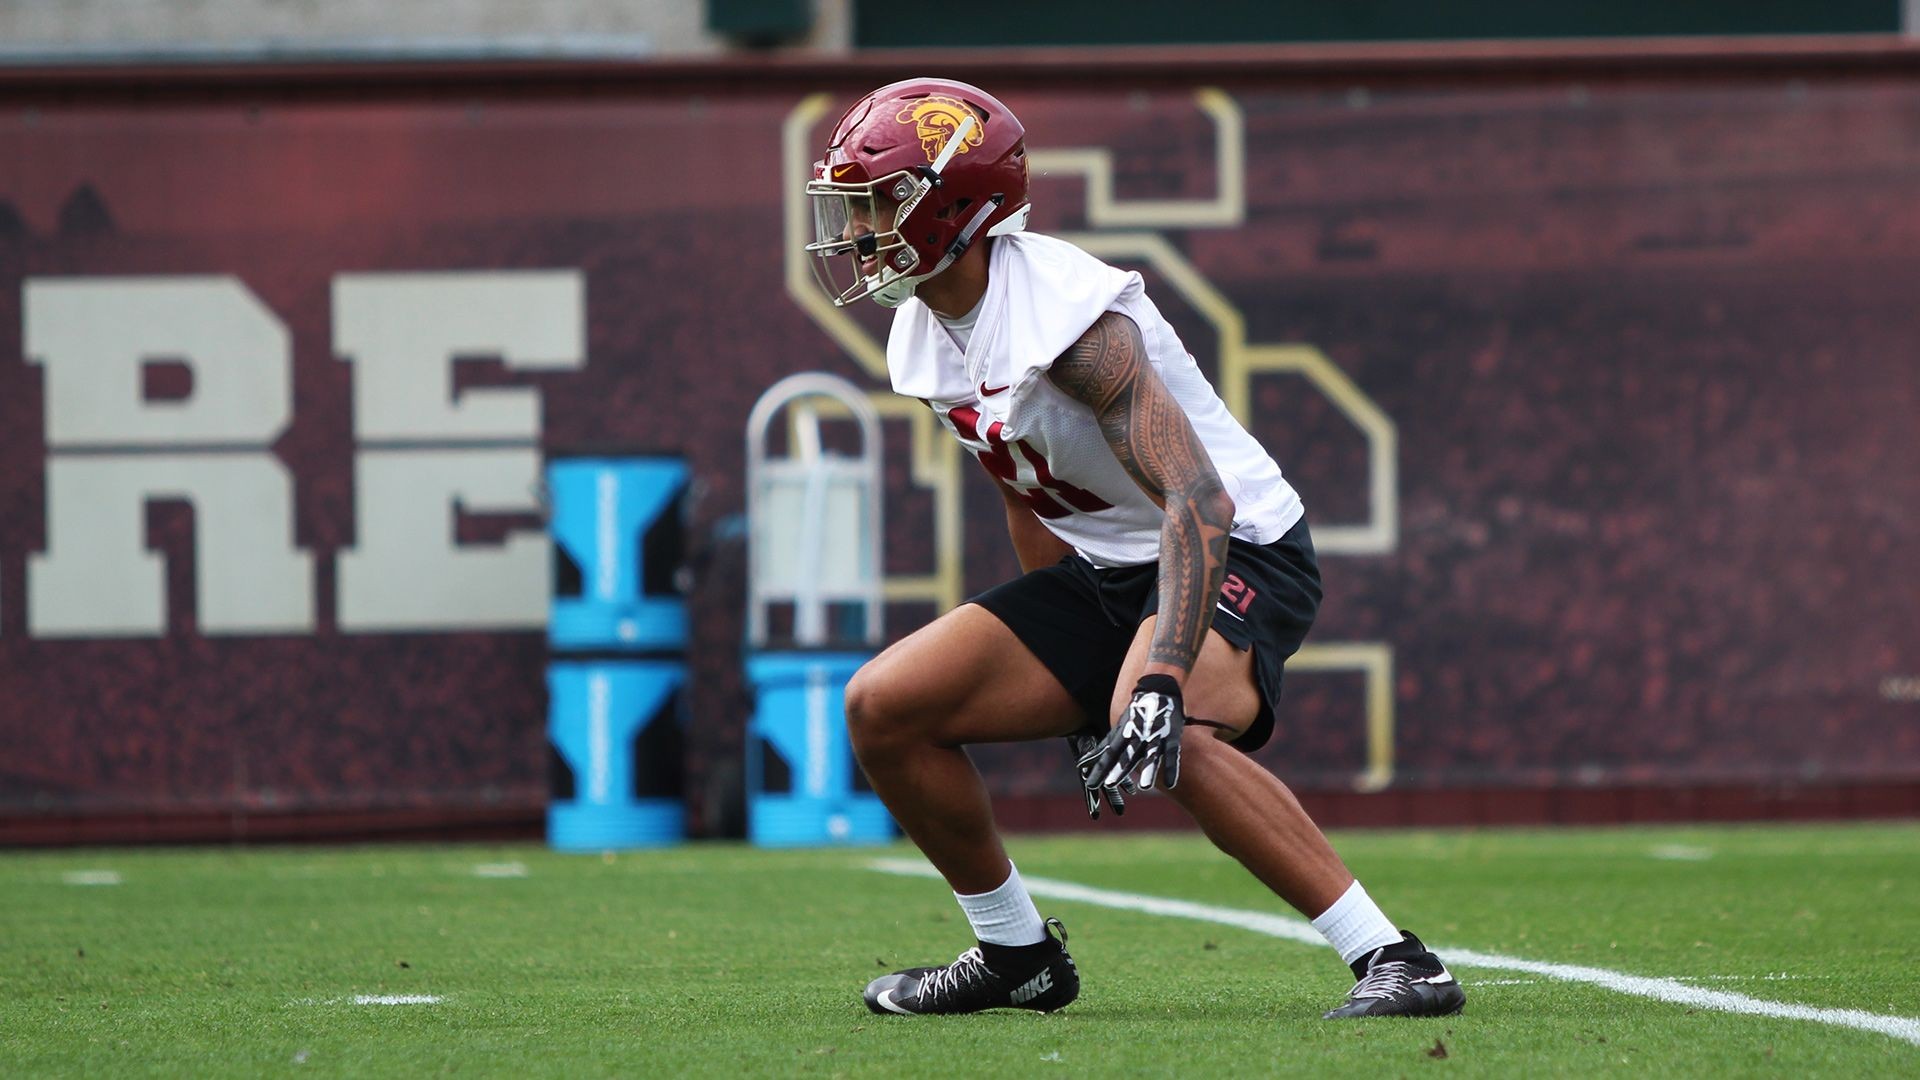 USC football Fall Camp 2019: Takeaways from the first weekend